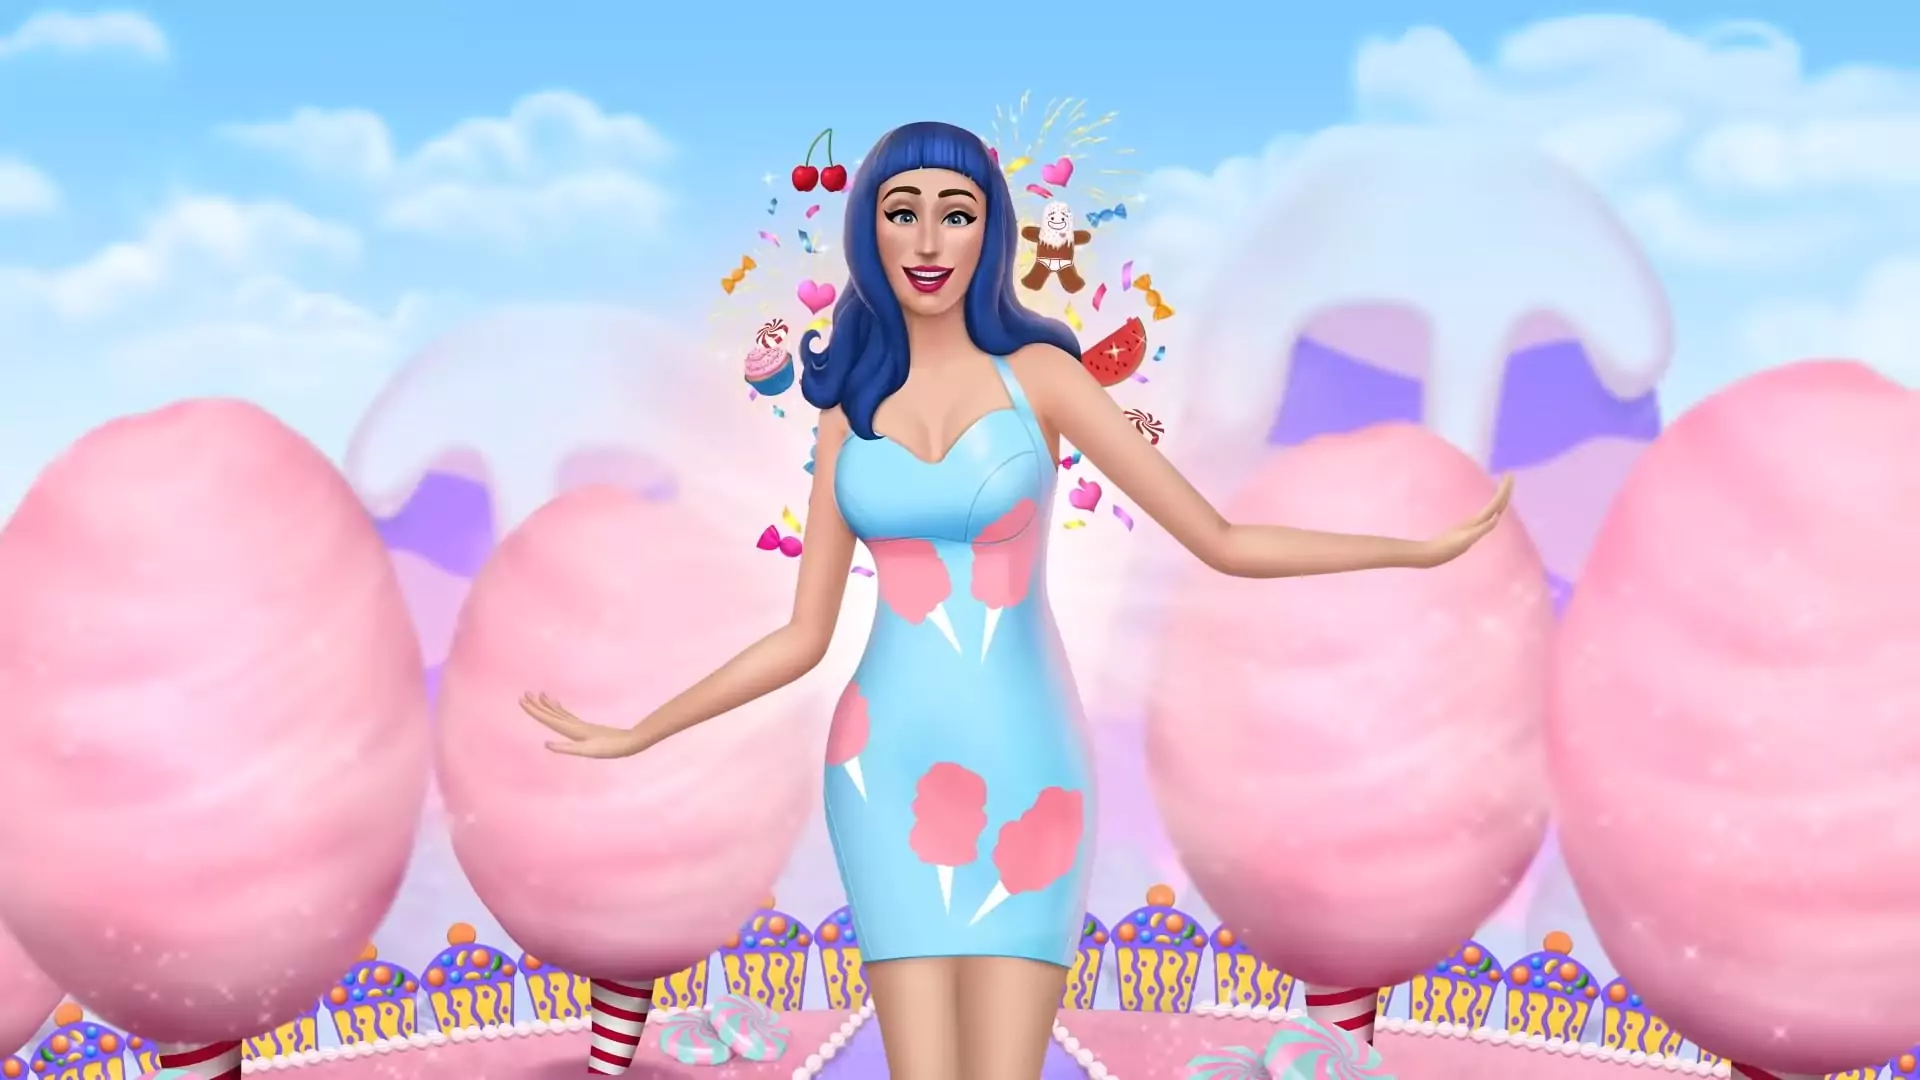 The Sims 4 Sweet Treats - Katy Perry with Cotton Candy Background